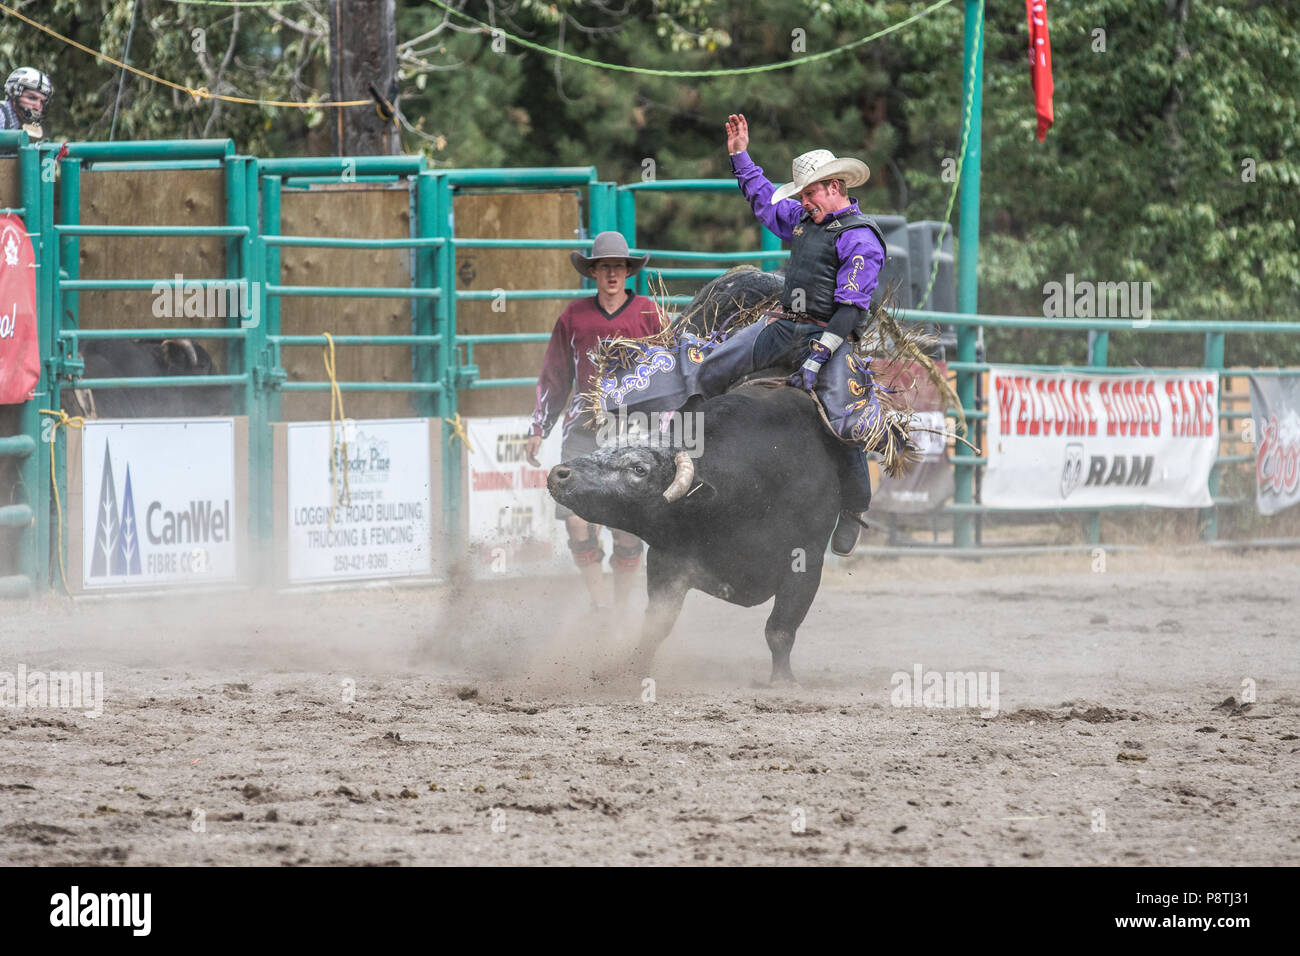 Bull Riding, rodeo's most exciting and dangerous sport. Huge bulls trying to throw the cowboys from there back. Cranbrook, BC, Canada. Stock Photo